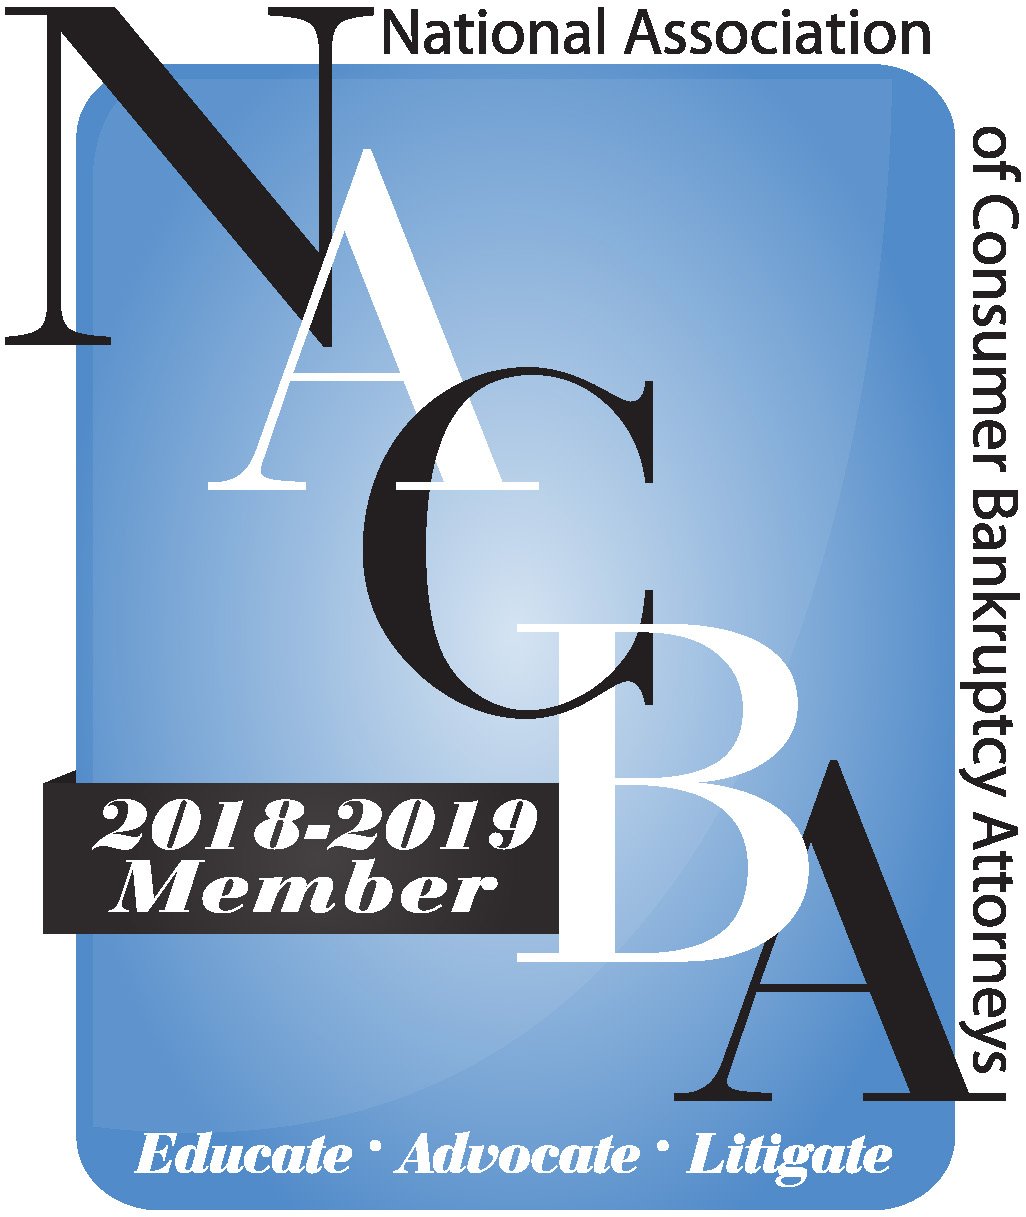 NACBA | National Association of Consumer Bankruptcy Attorneys | 2018-2019 Member | Educate. Advocate. Litigate